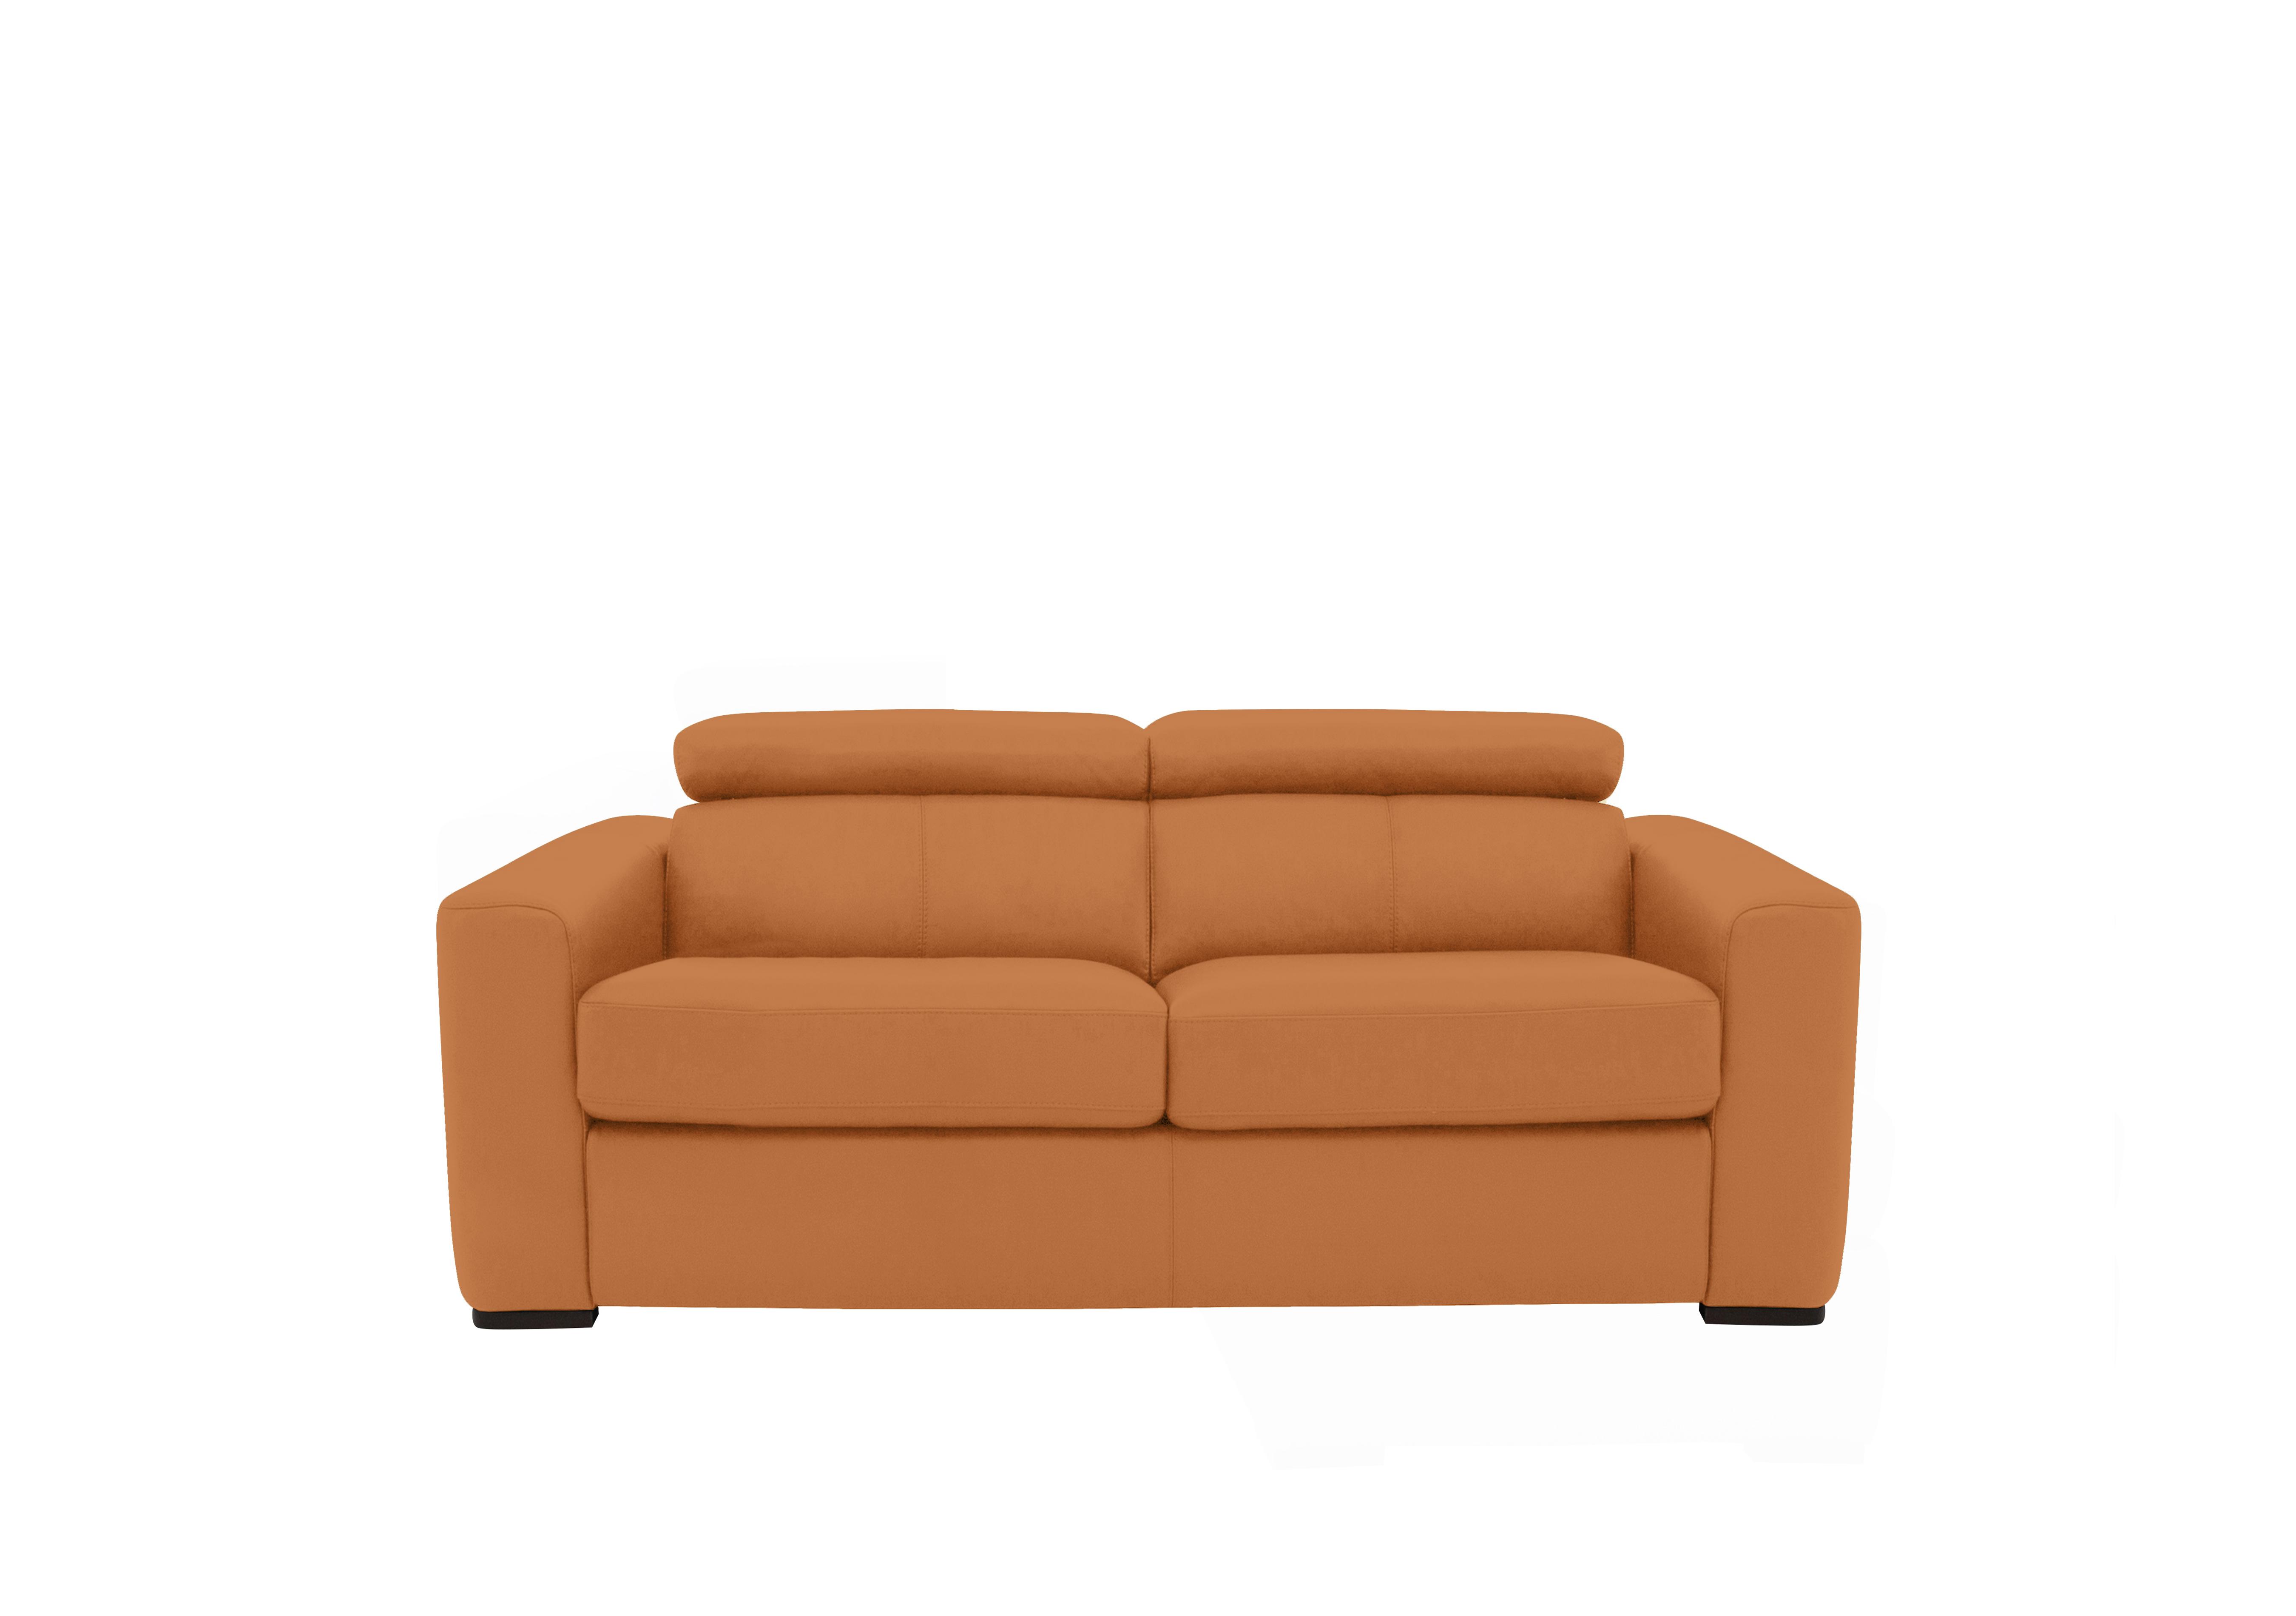 Infinity 2 Seater Leather Sofa in Bv-335e Honey Yellow on Furniture Village